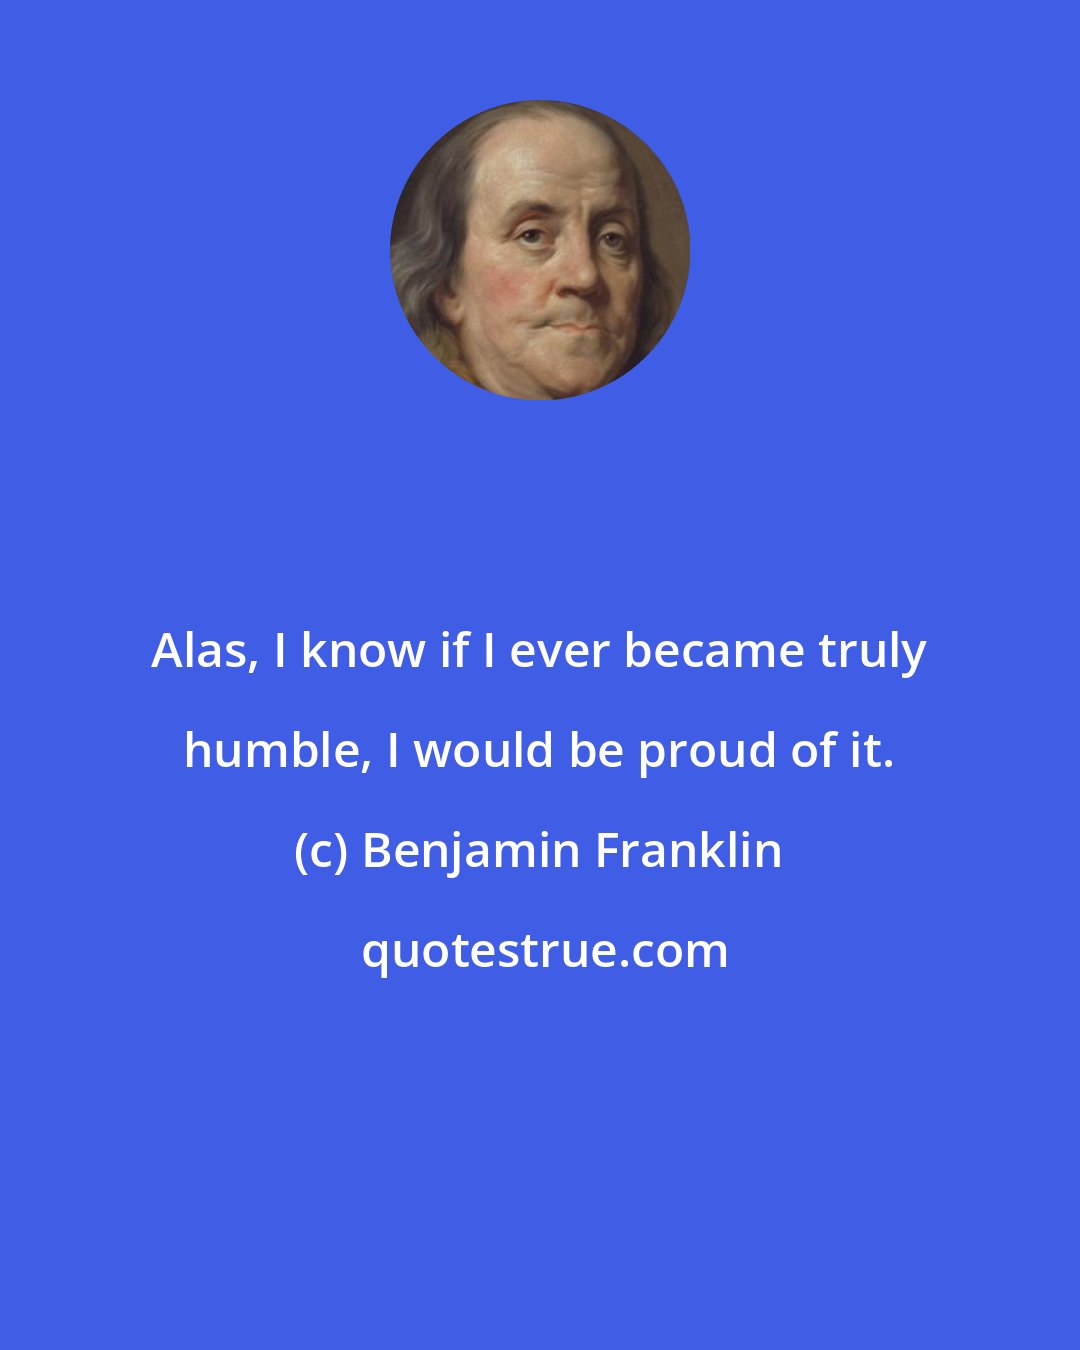 Benjamin Franklin: Alas, I know if I ever became truly humble, I would be proud of it.